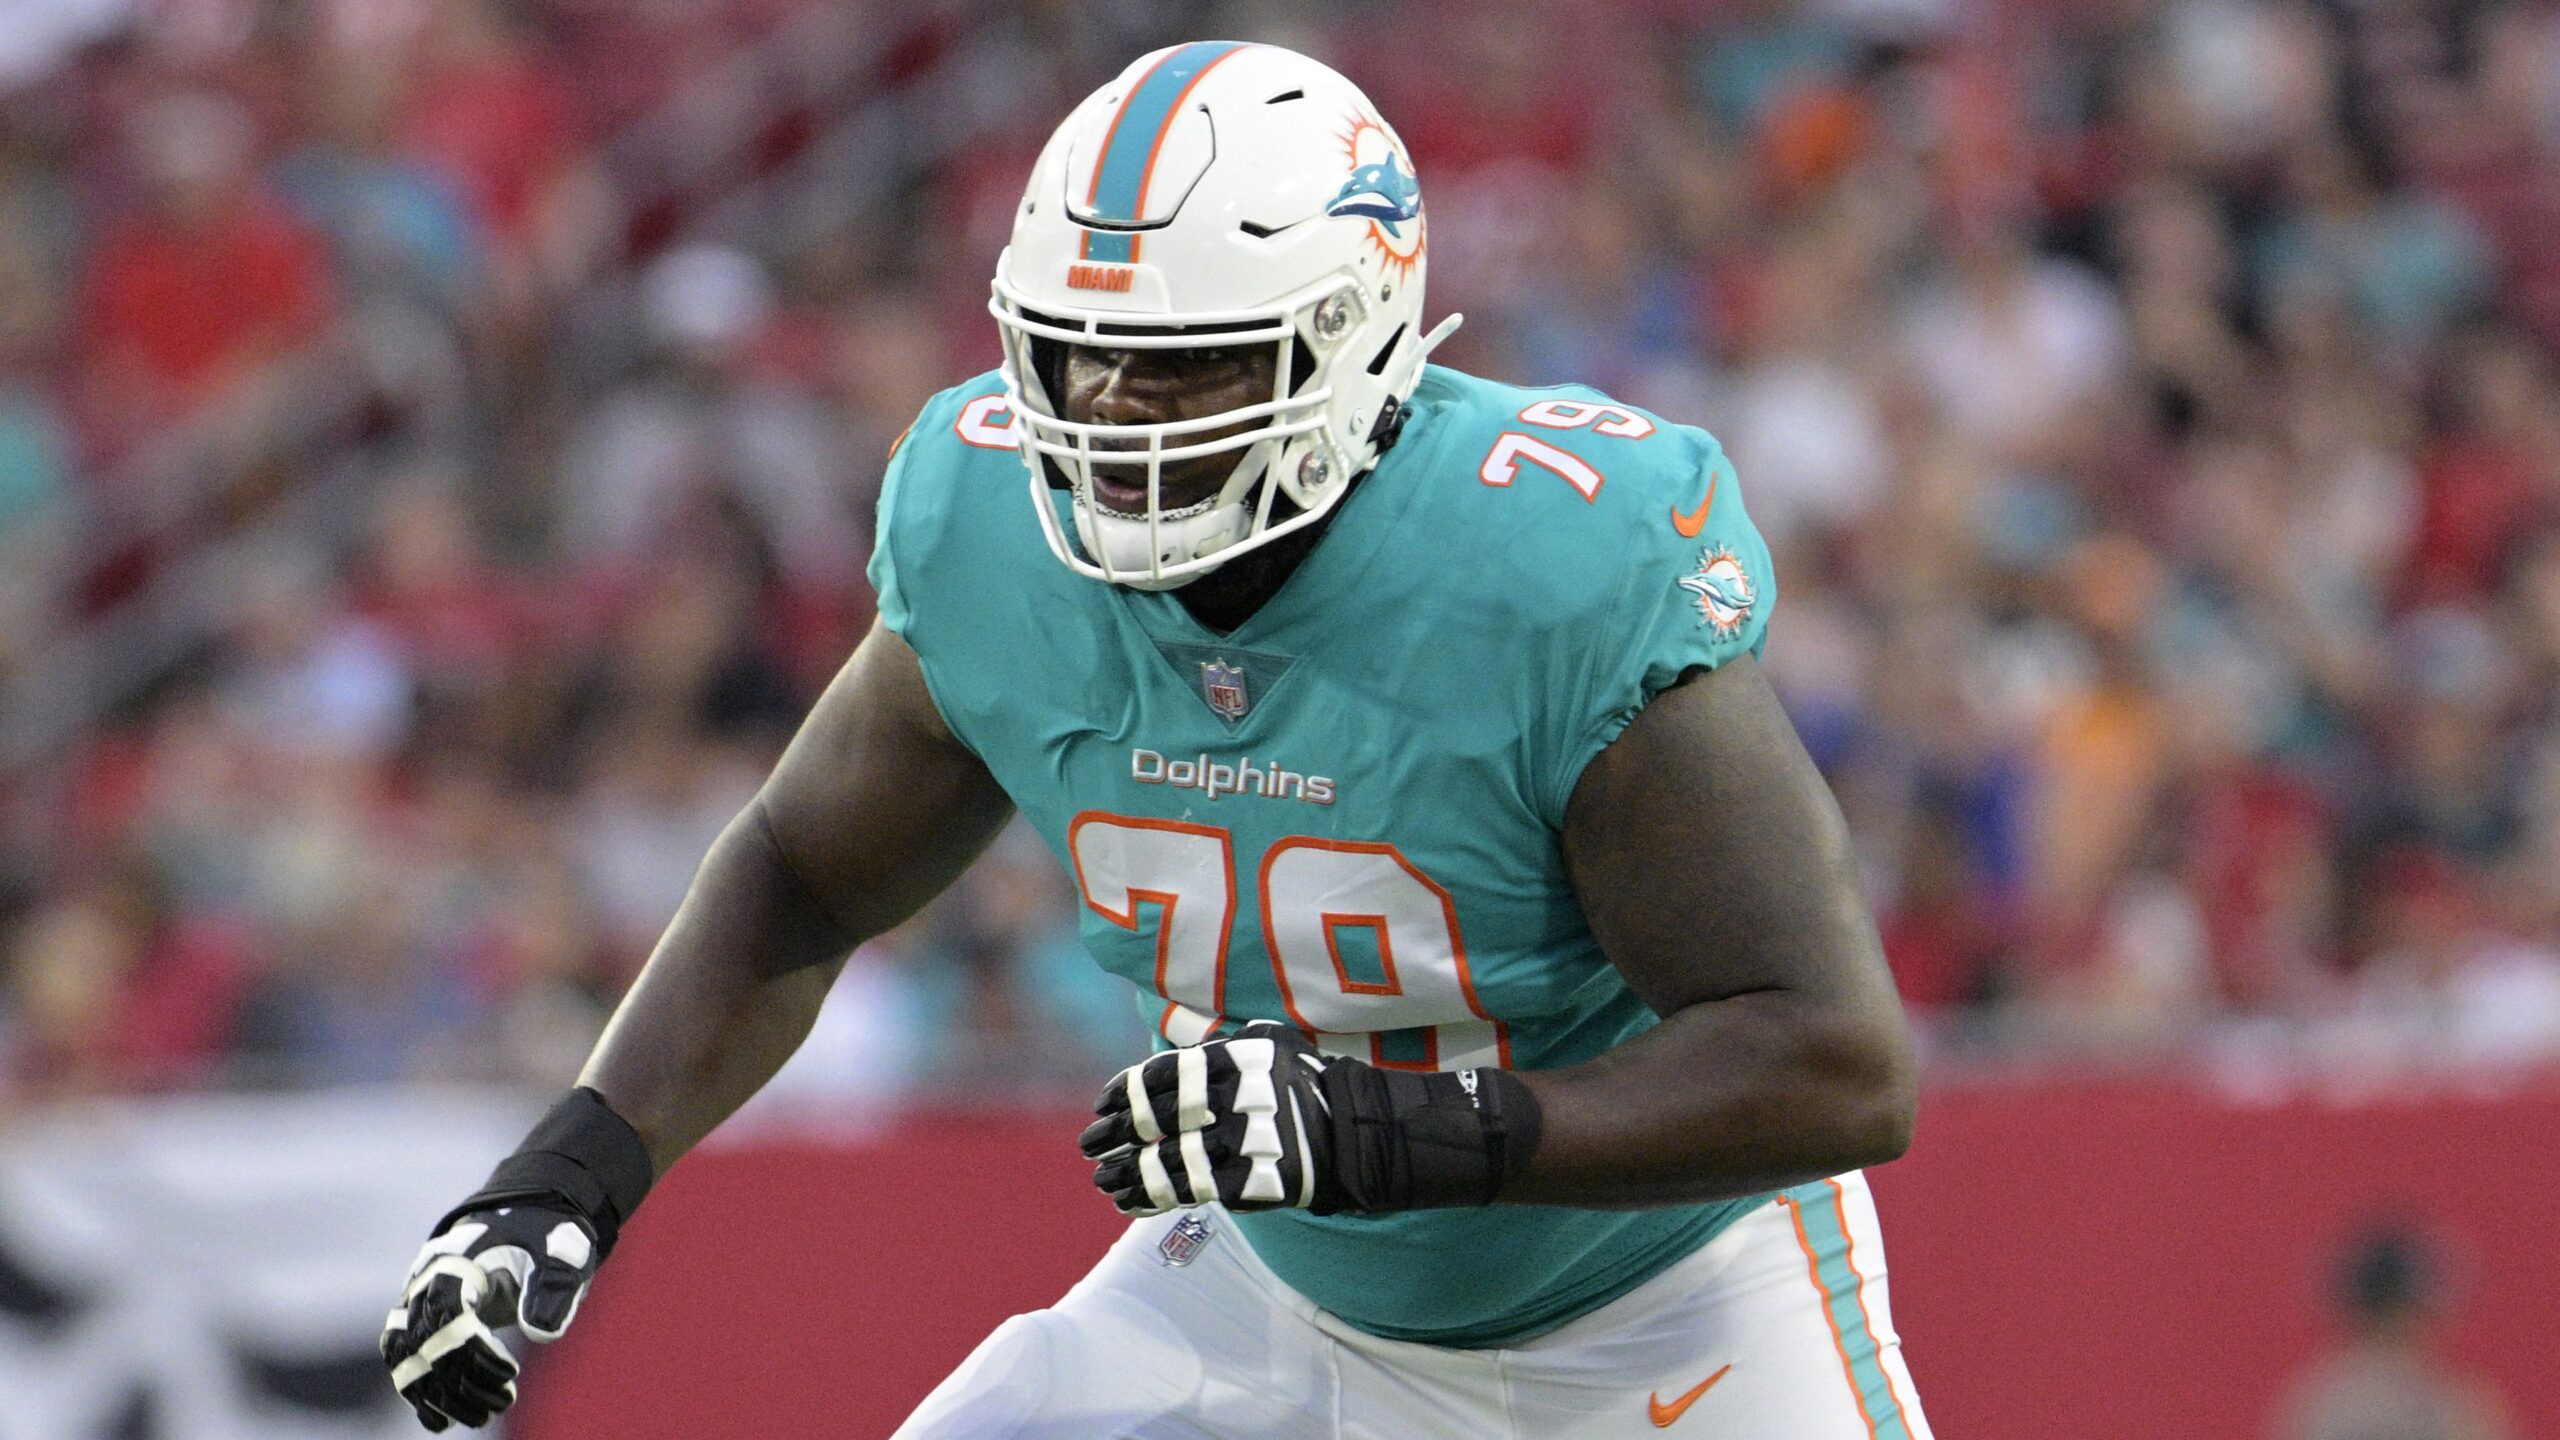 Dr. Morse breaks down a significant chest injury to the Dolphins star offensive lineman Terron Armstead and what his loss means for Miami's electric offense.